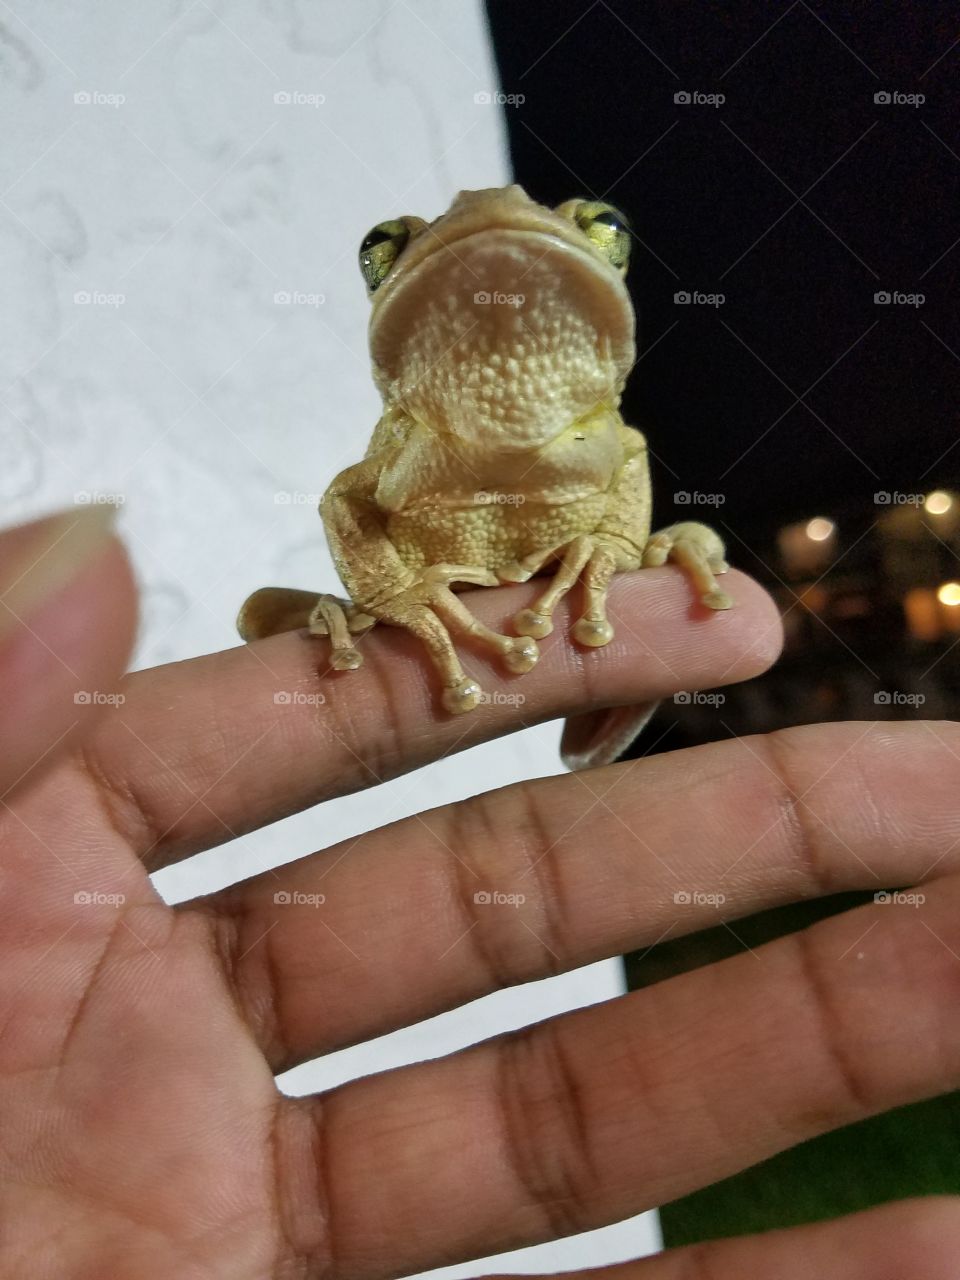 Found this sticky fingered fella late at night!